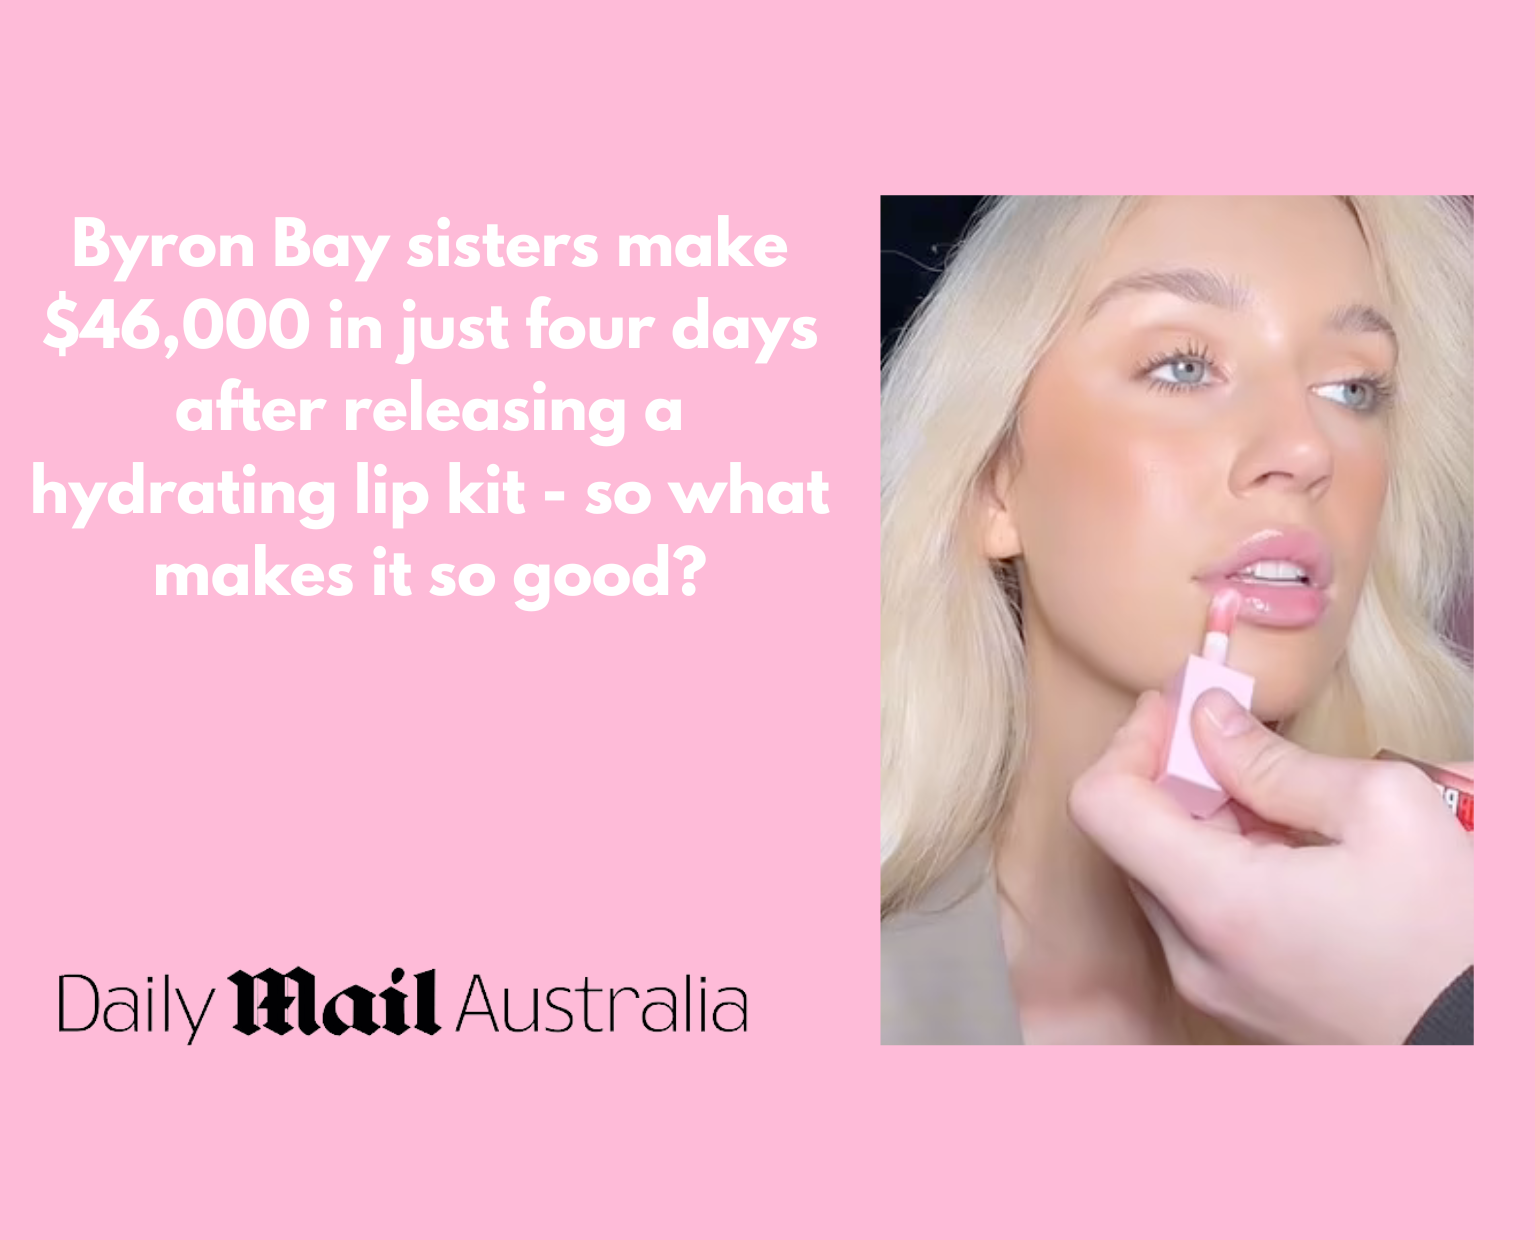 Byron Bay sisters make $46,000 in just four days after releasing a hydrating lip kit - so what makes it so good?